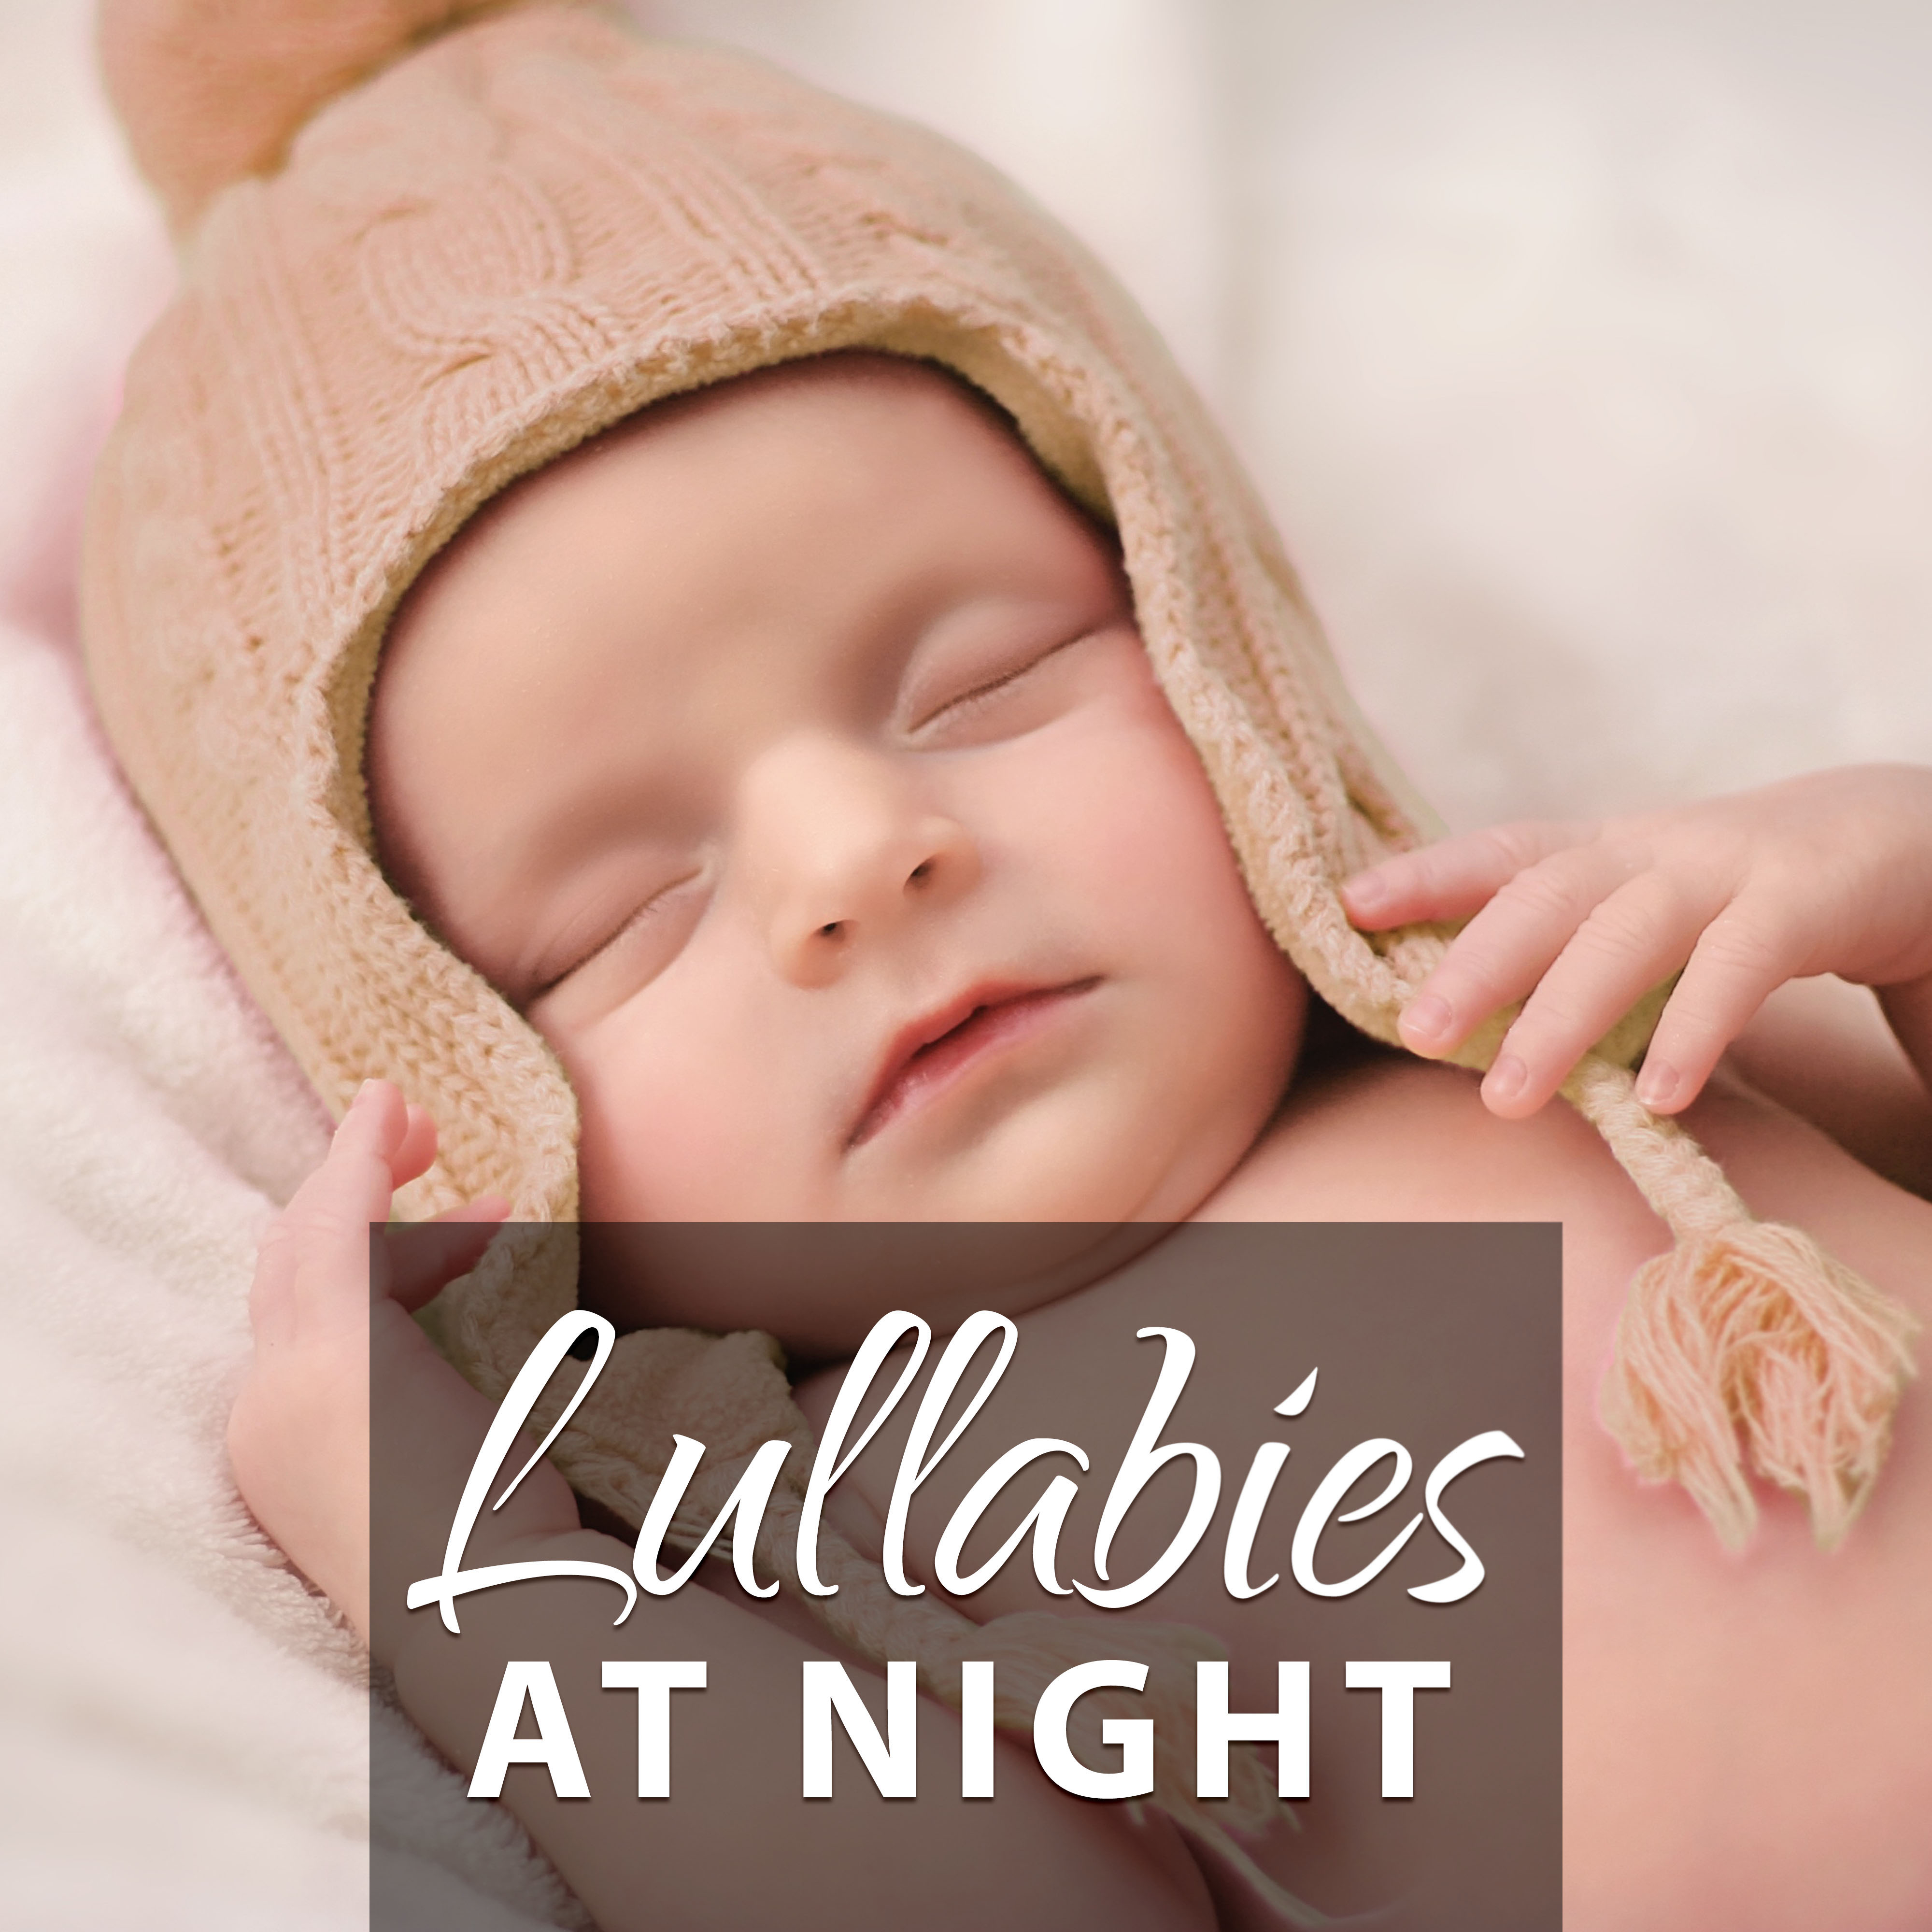 Lullabies at Night  Calm Classical Melodies, Lullabies for Little Baby, Sleeping Time, Schubert, Beethoven, Mozart